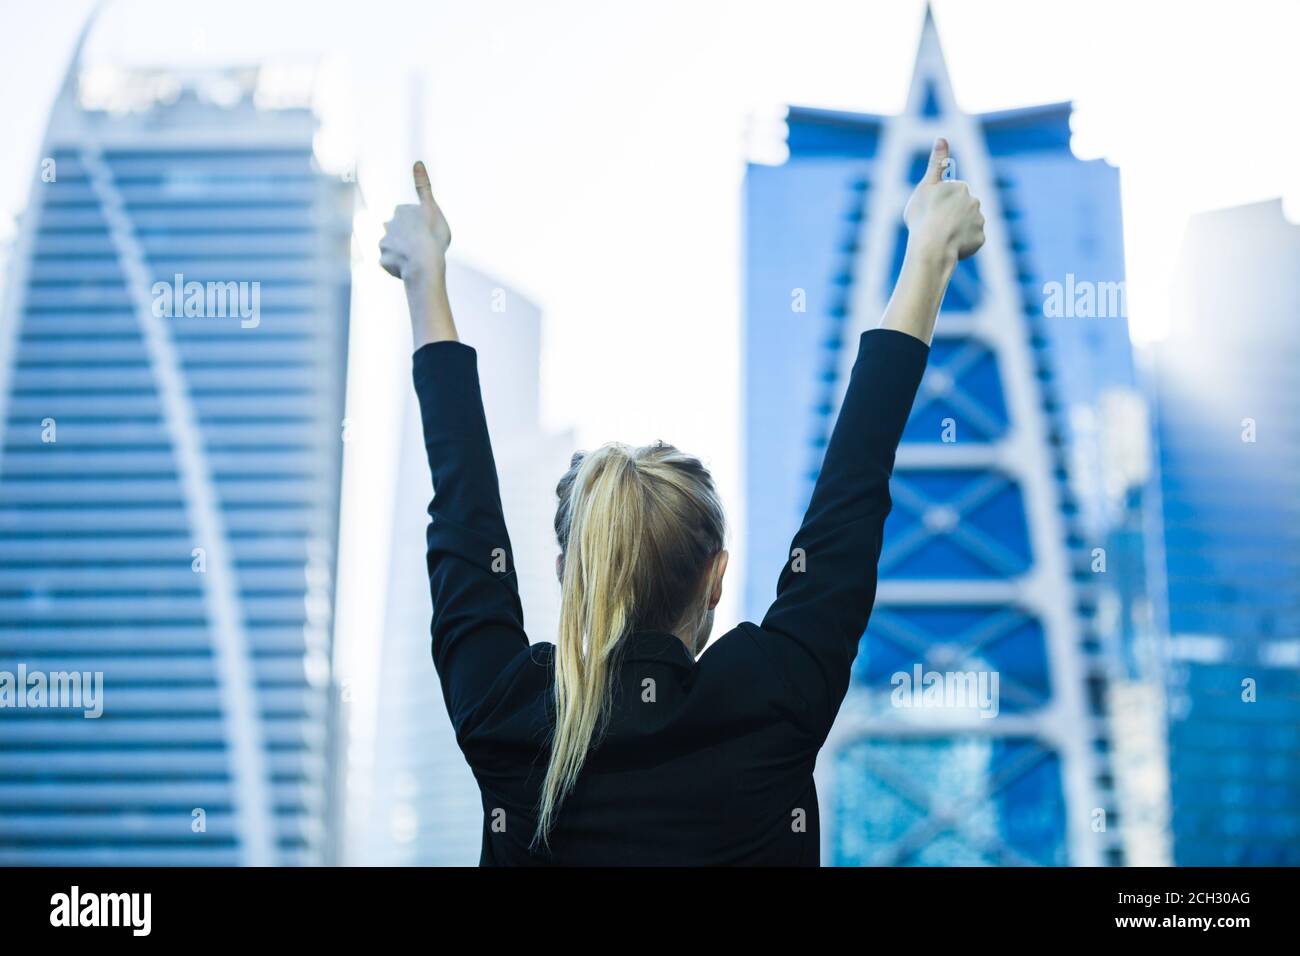 Business success - Celebrating businesswoman overlooking the city high-rise buildings. Optimistic happy woman with hands in the air and thumbs up. Stock Photo